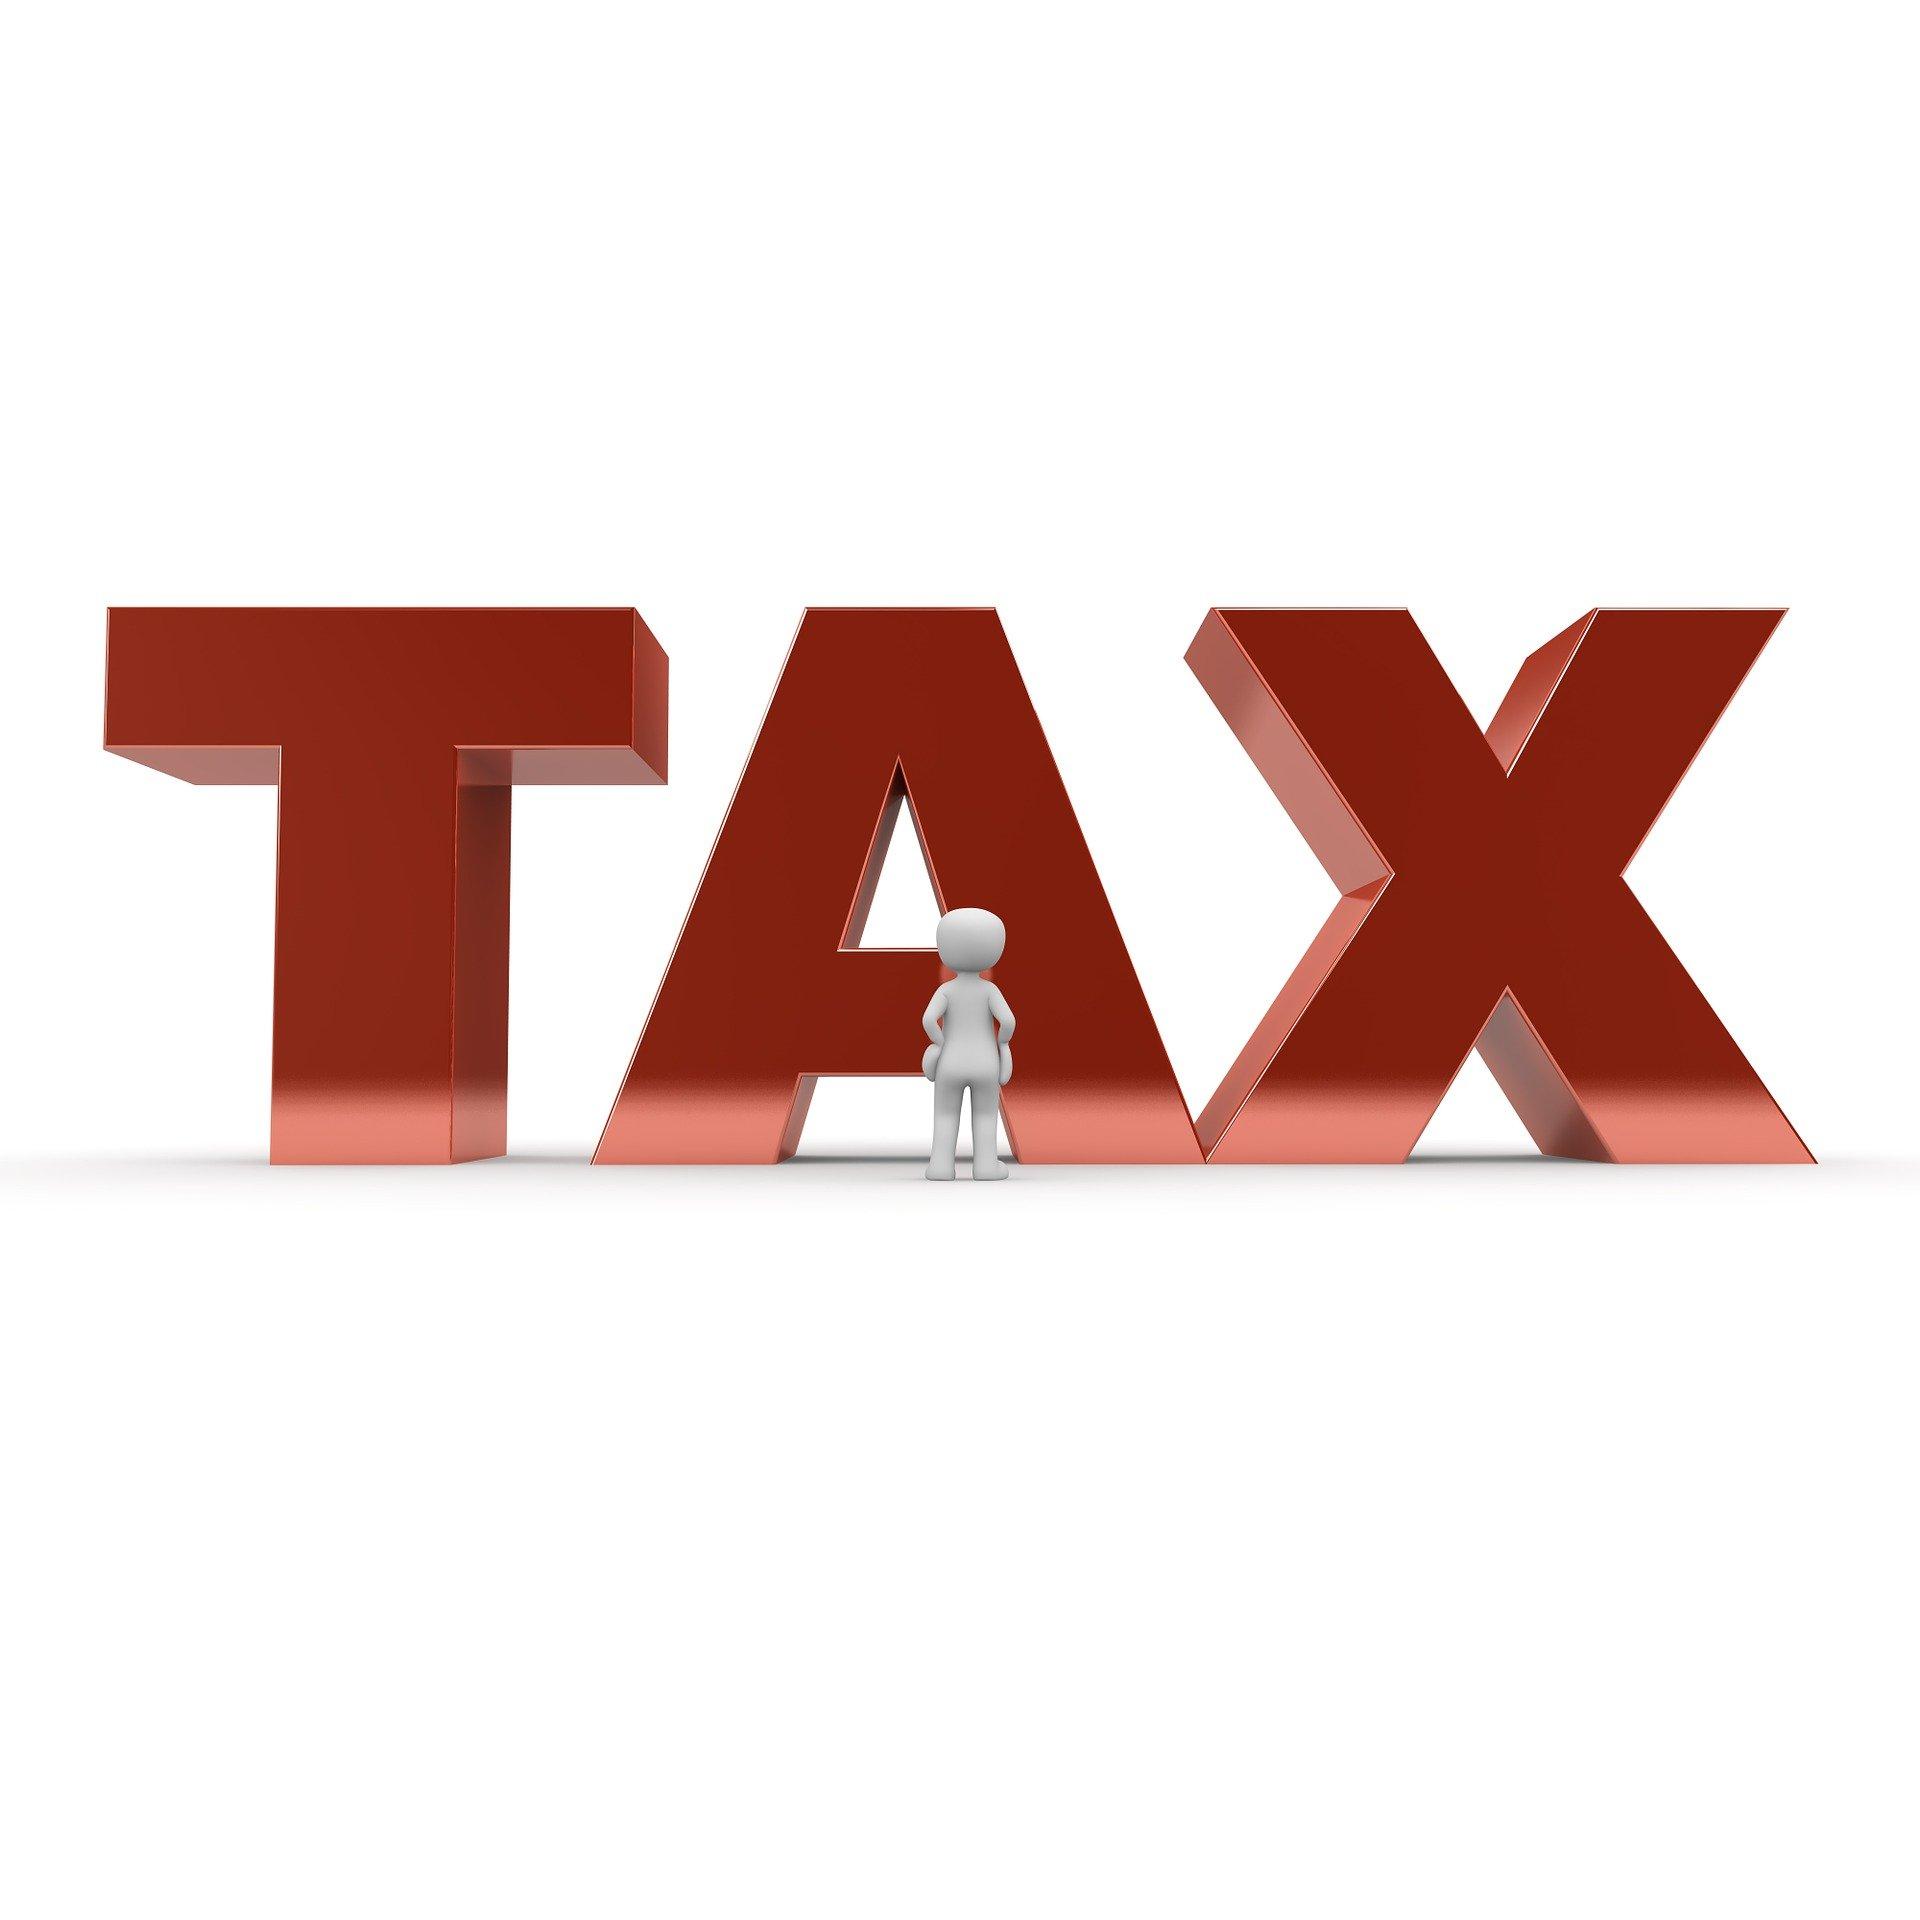 San Diego Specialist Local Tax Resolution Counsel Help Prevent IRS Asset Seizure